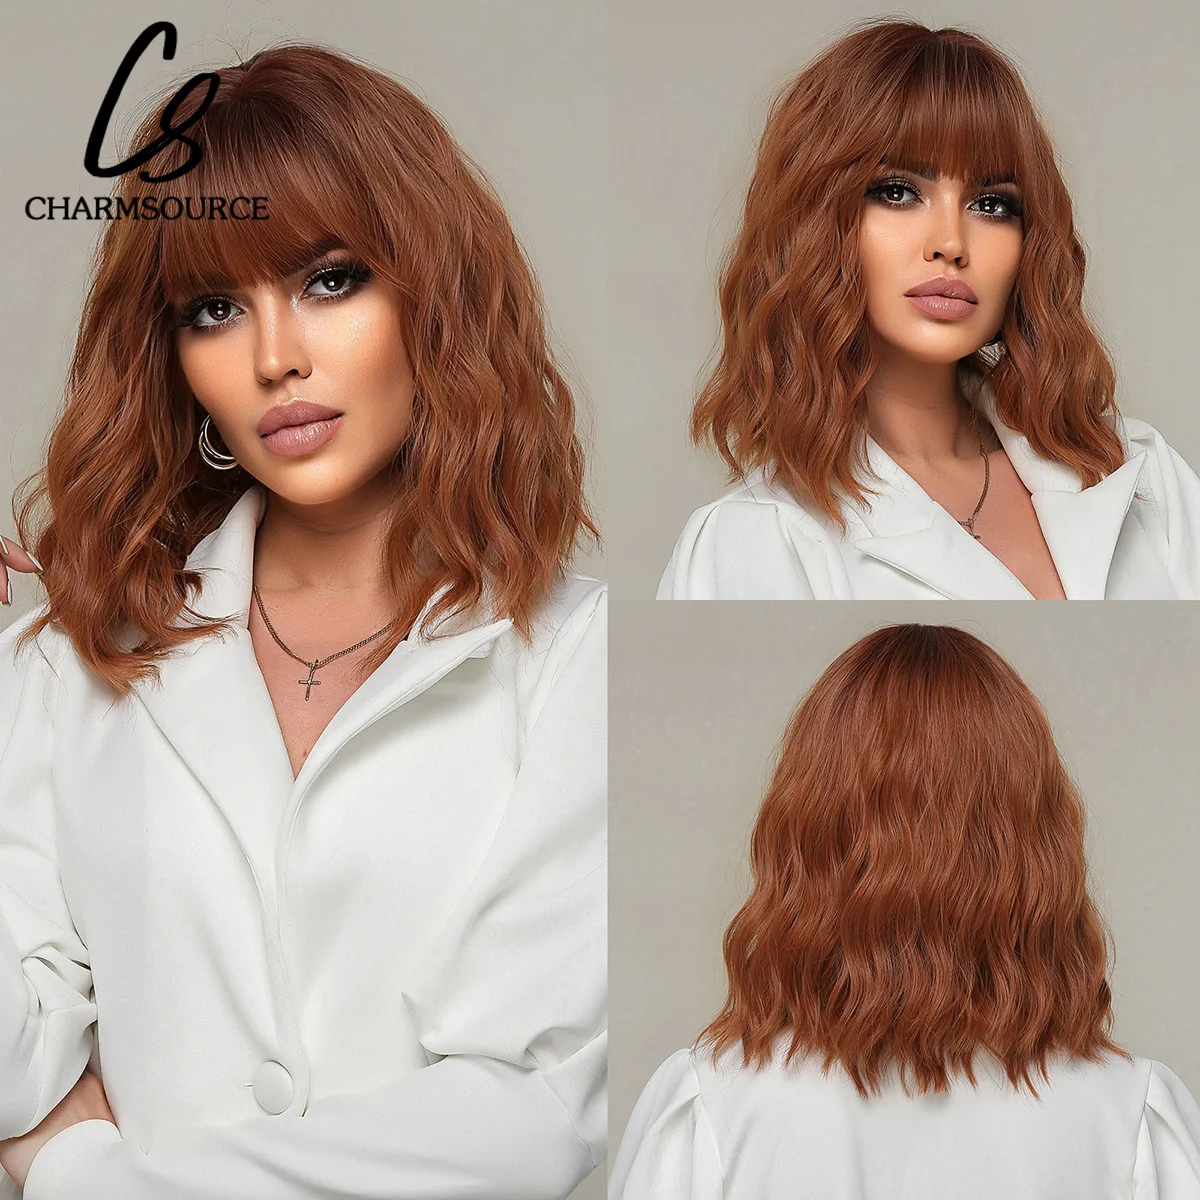 

Curly Bob Synthetic Wigs with Bangs Orange Reddish Brown Short Medium Length Wig for Women Wavy Bobo Hair Cosplay Daily Party